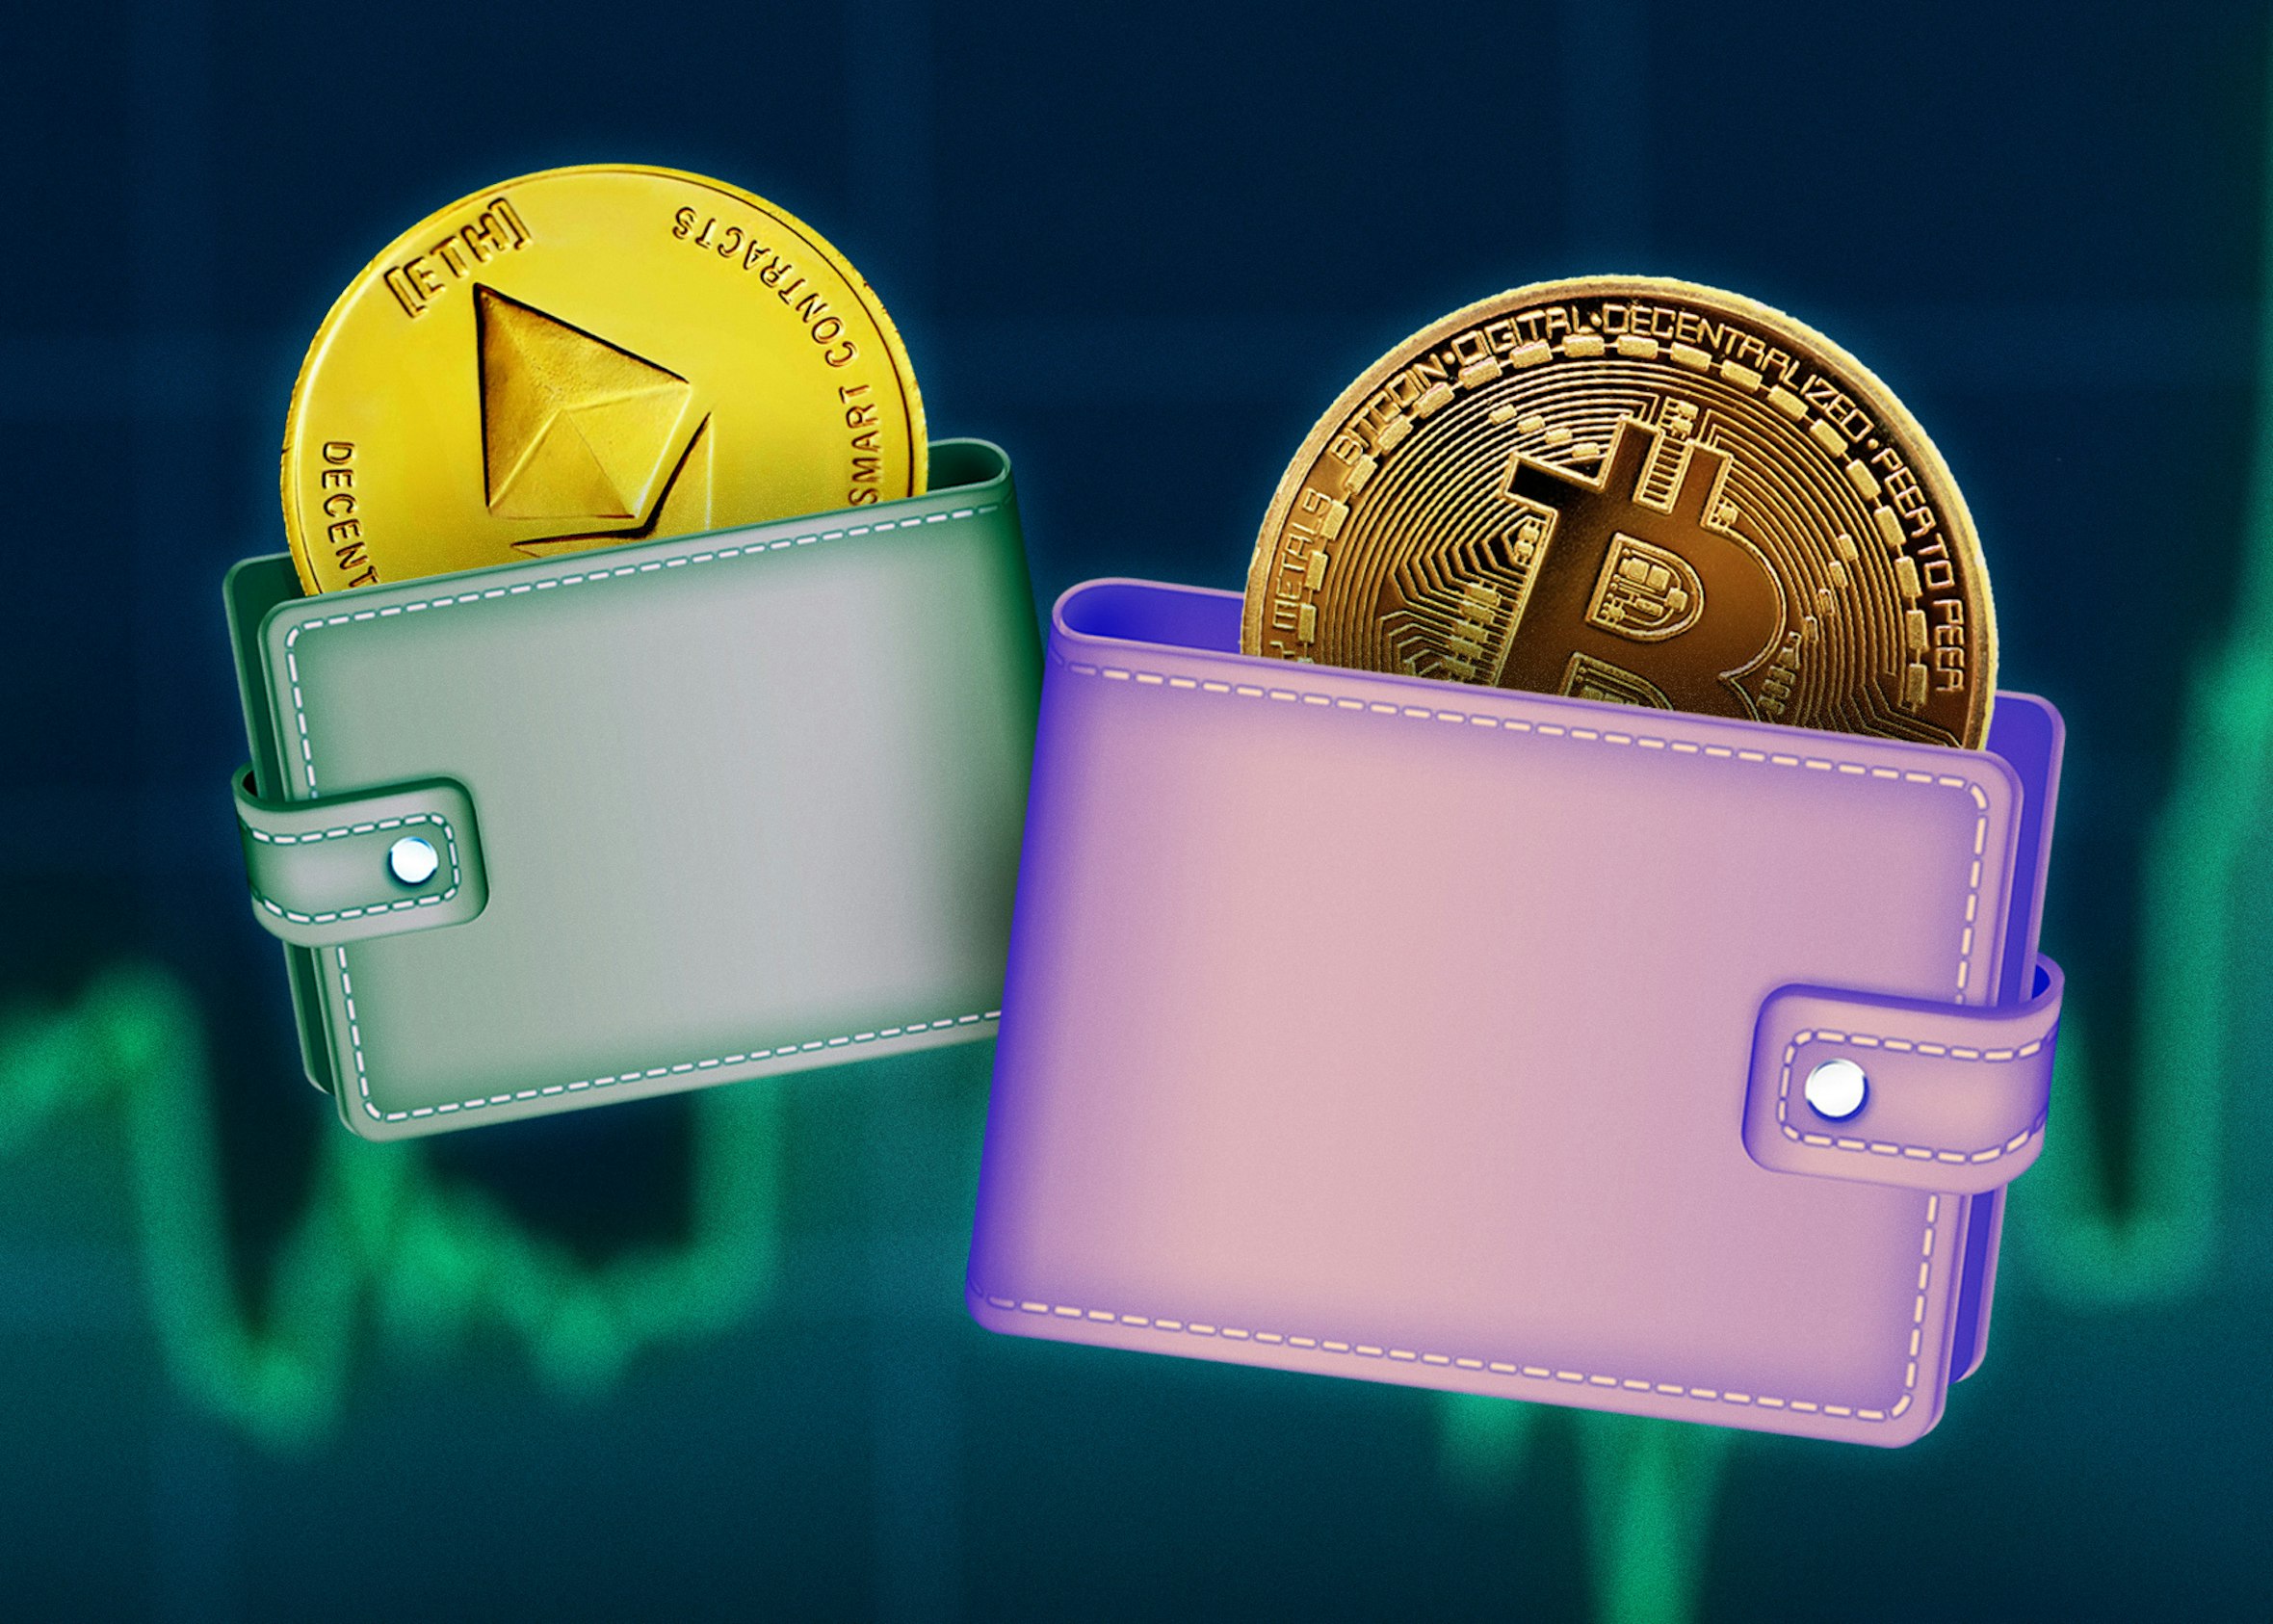 crypto currency merchant wallet